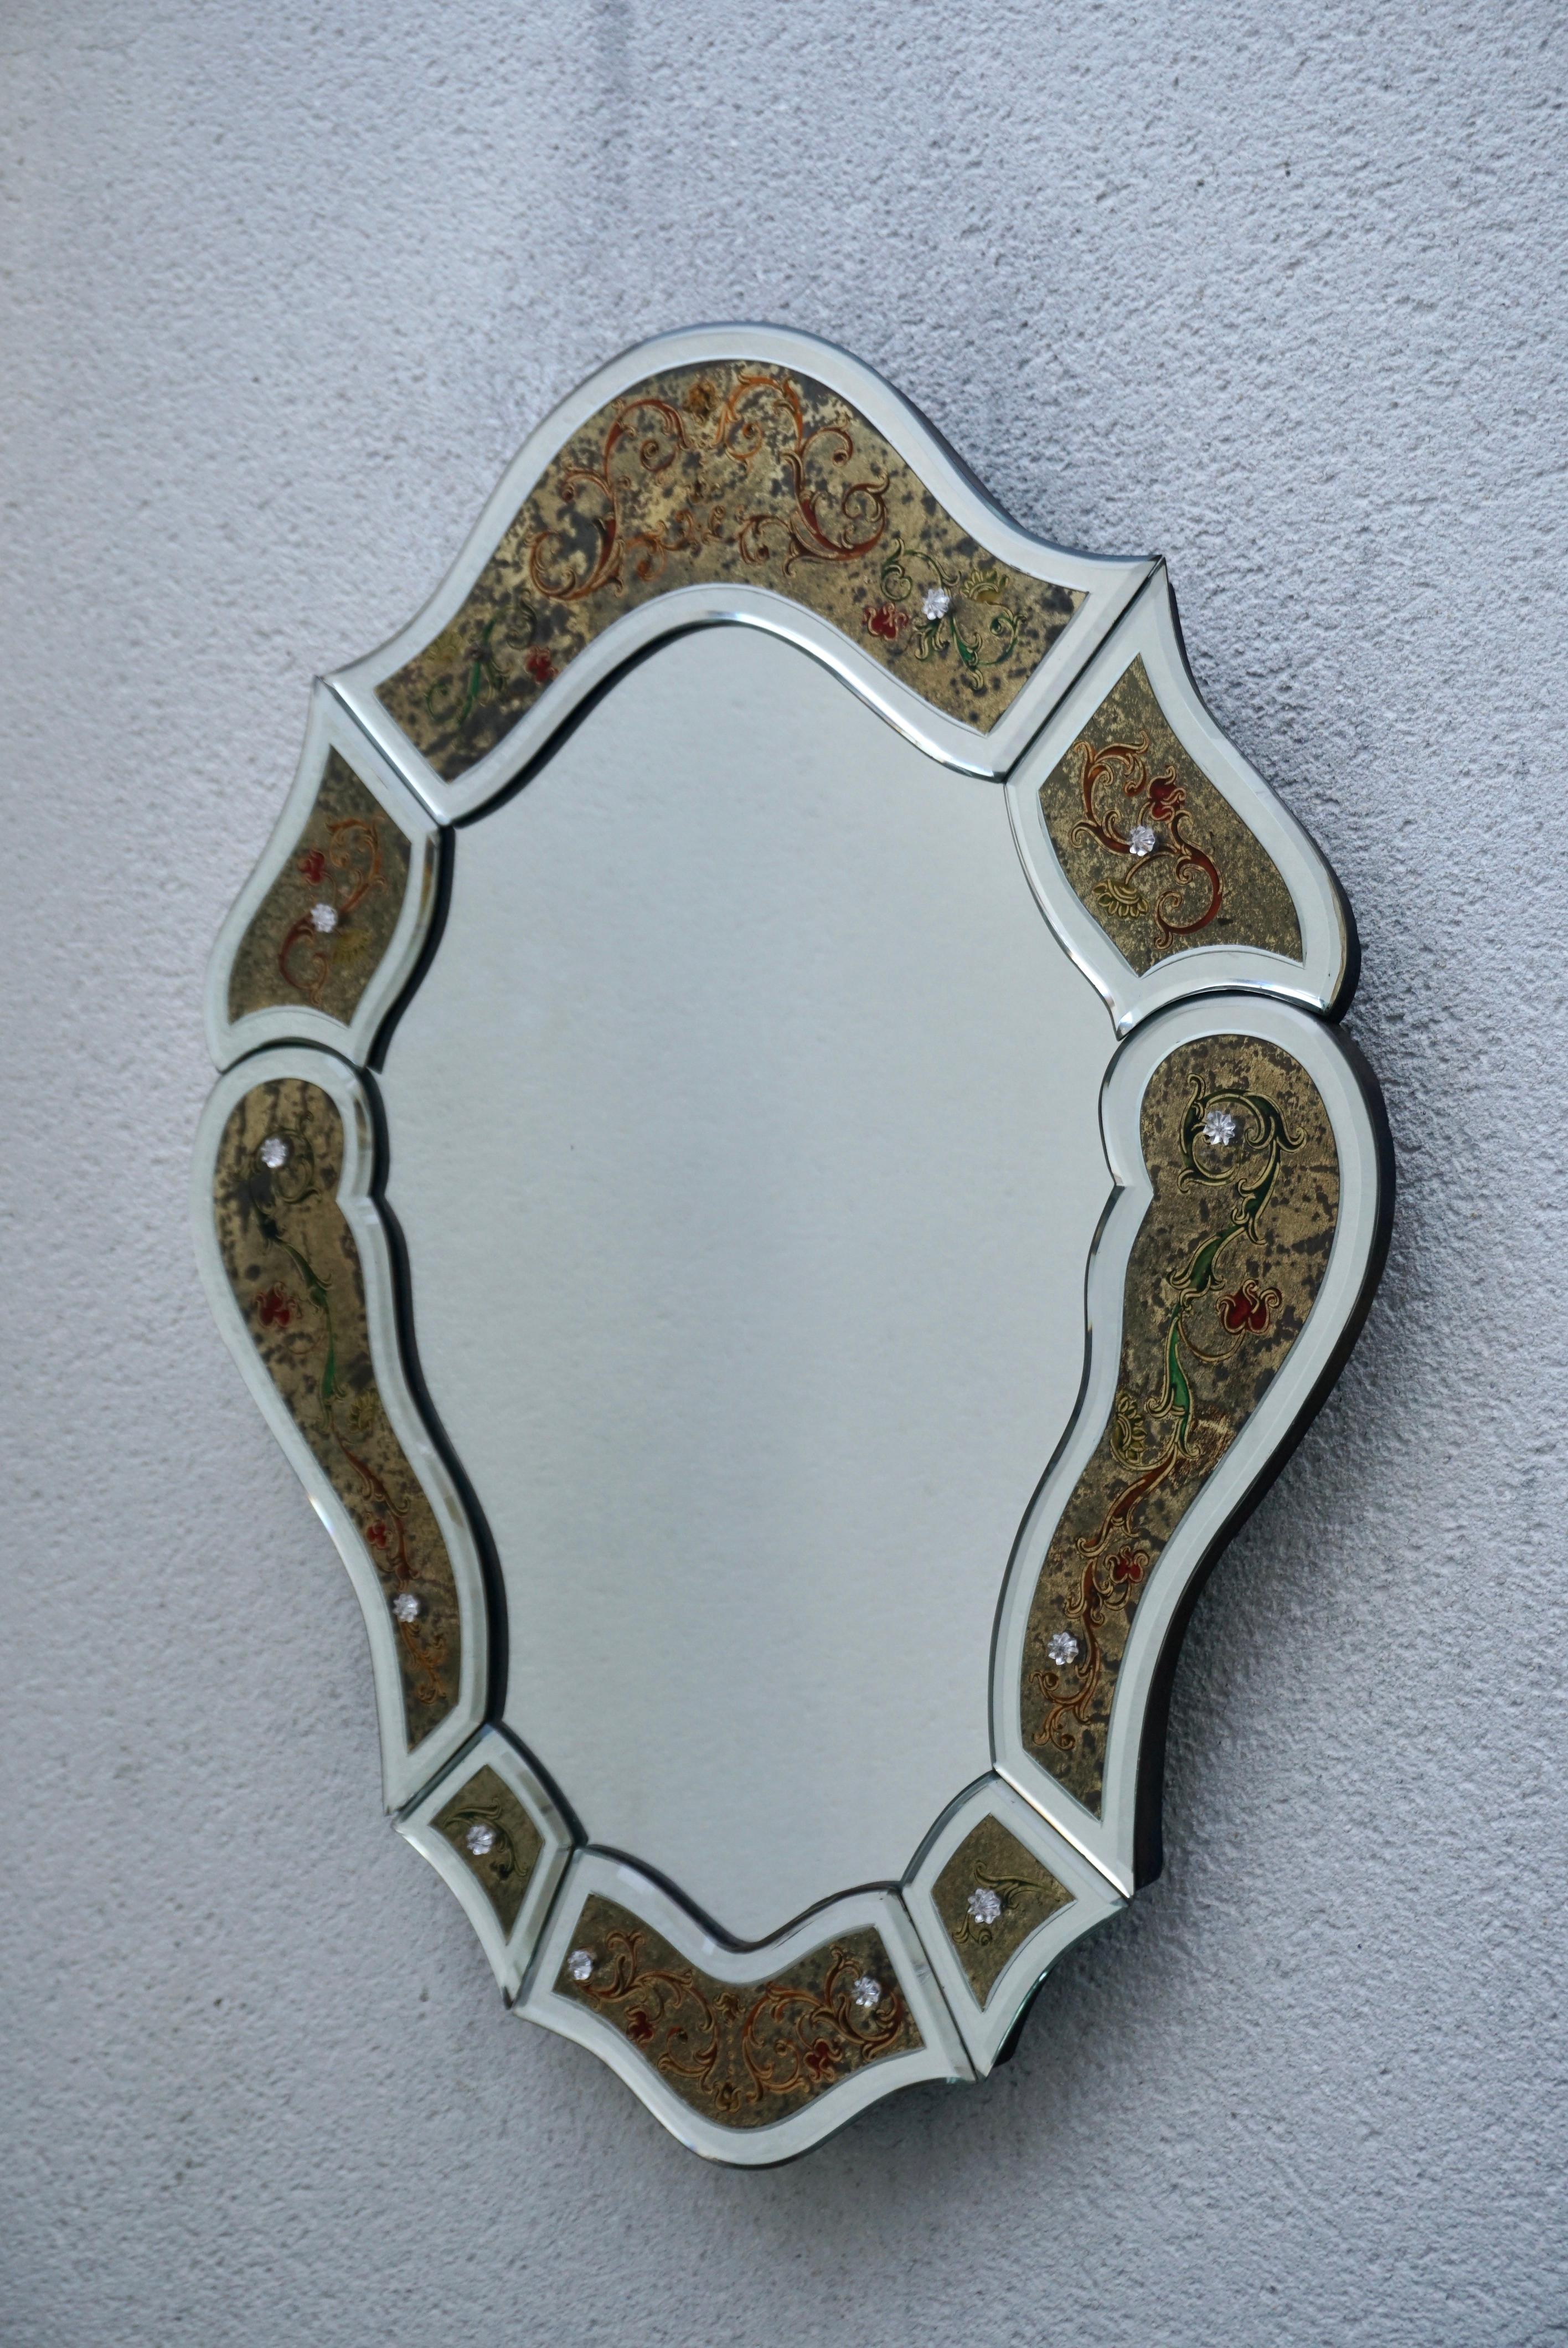 A beautiful venetian wall mirror featuring a mirrored frame with gold leaf églomisé detailing and a hand painted floral and scroll design. Italy, 20th century.